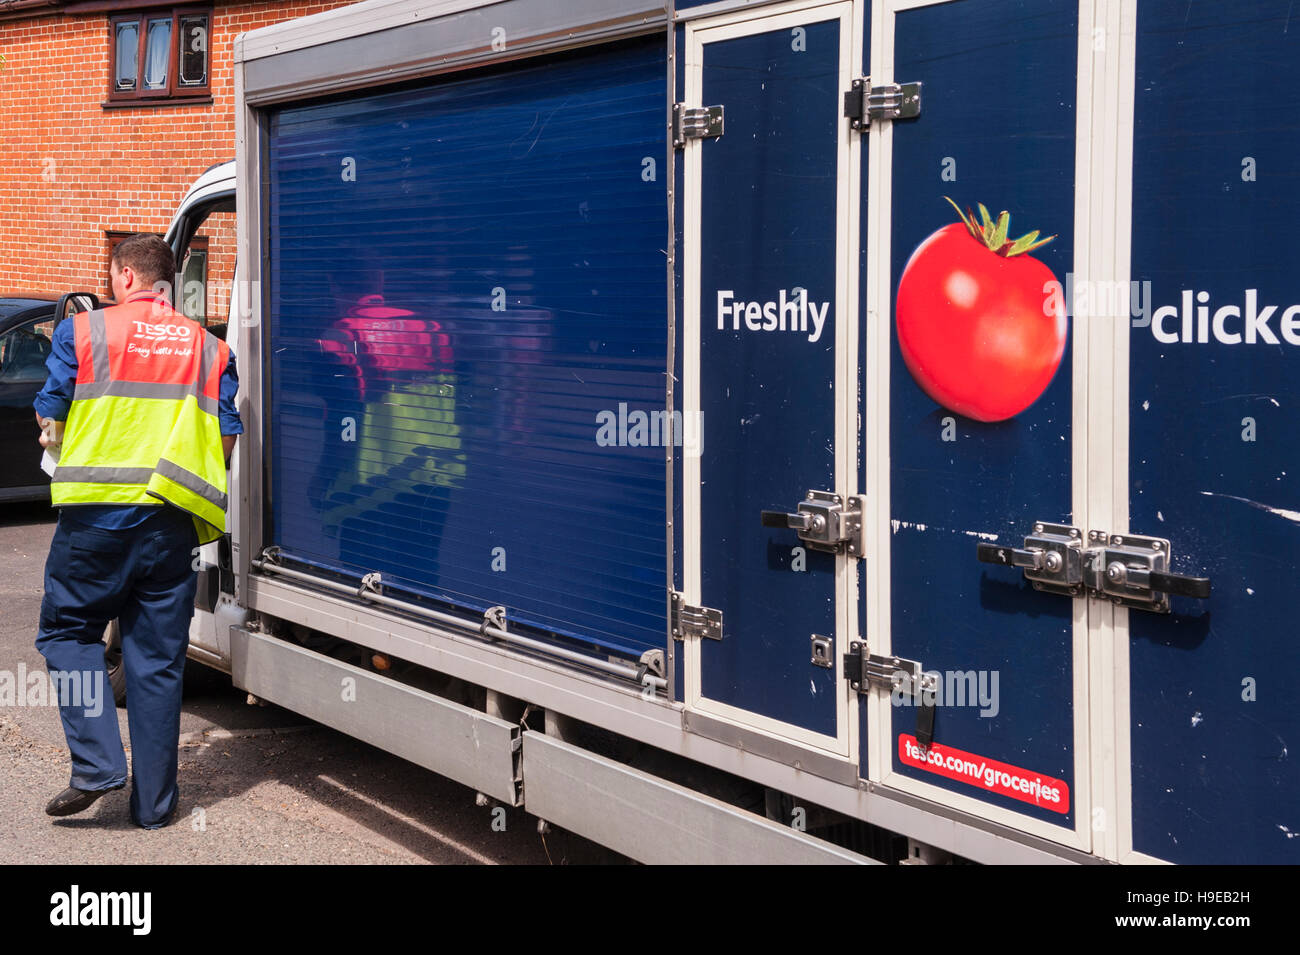 A Tesco delivery van delivering groceries in the Uk Stock Photo